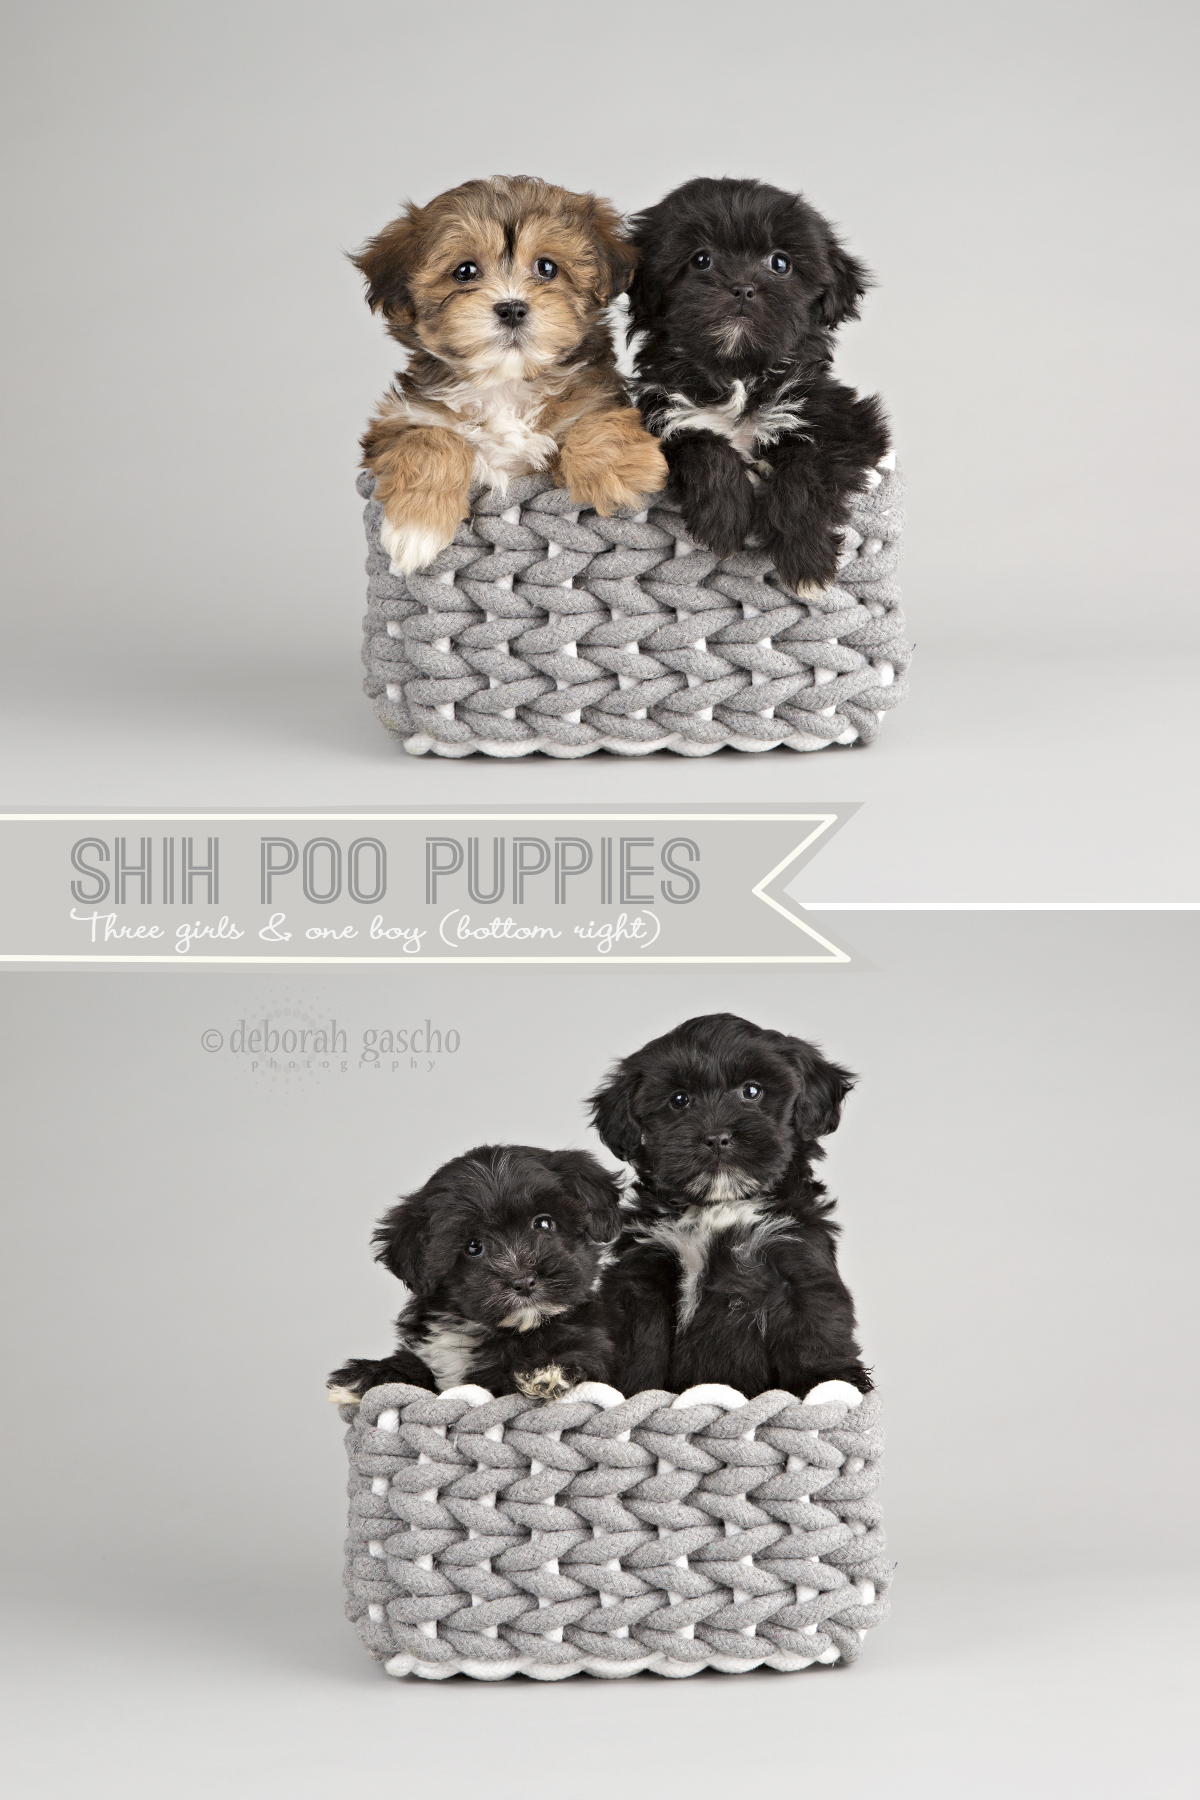 alt="shih poo puppies for sale in ontario"